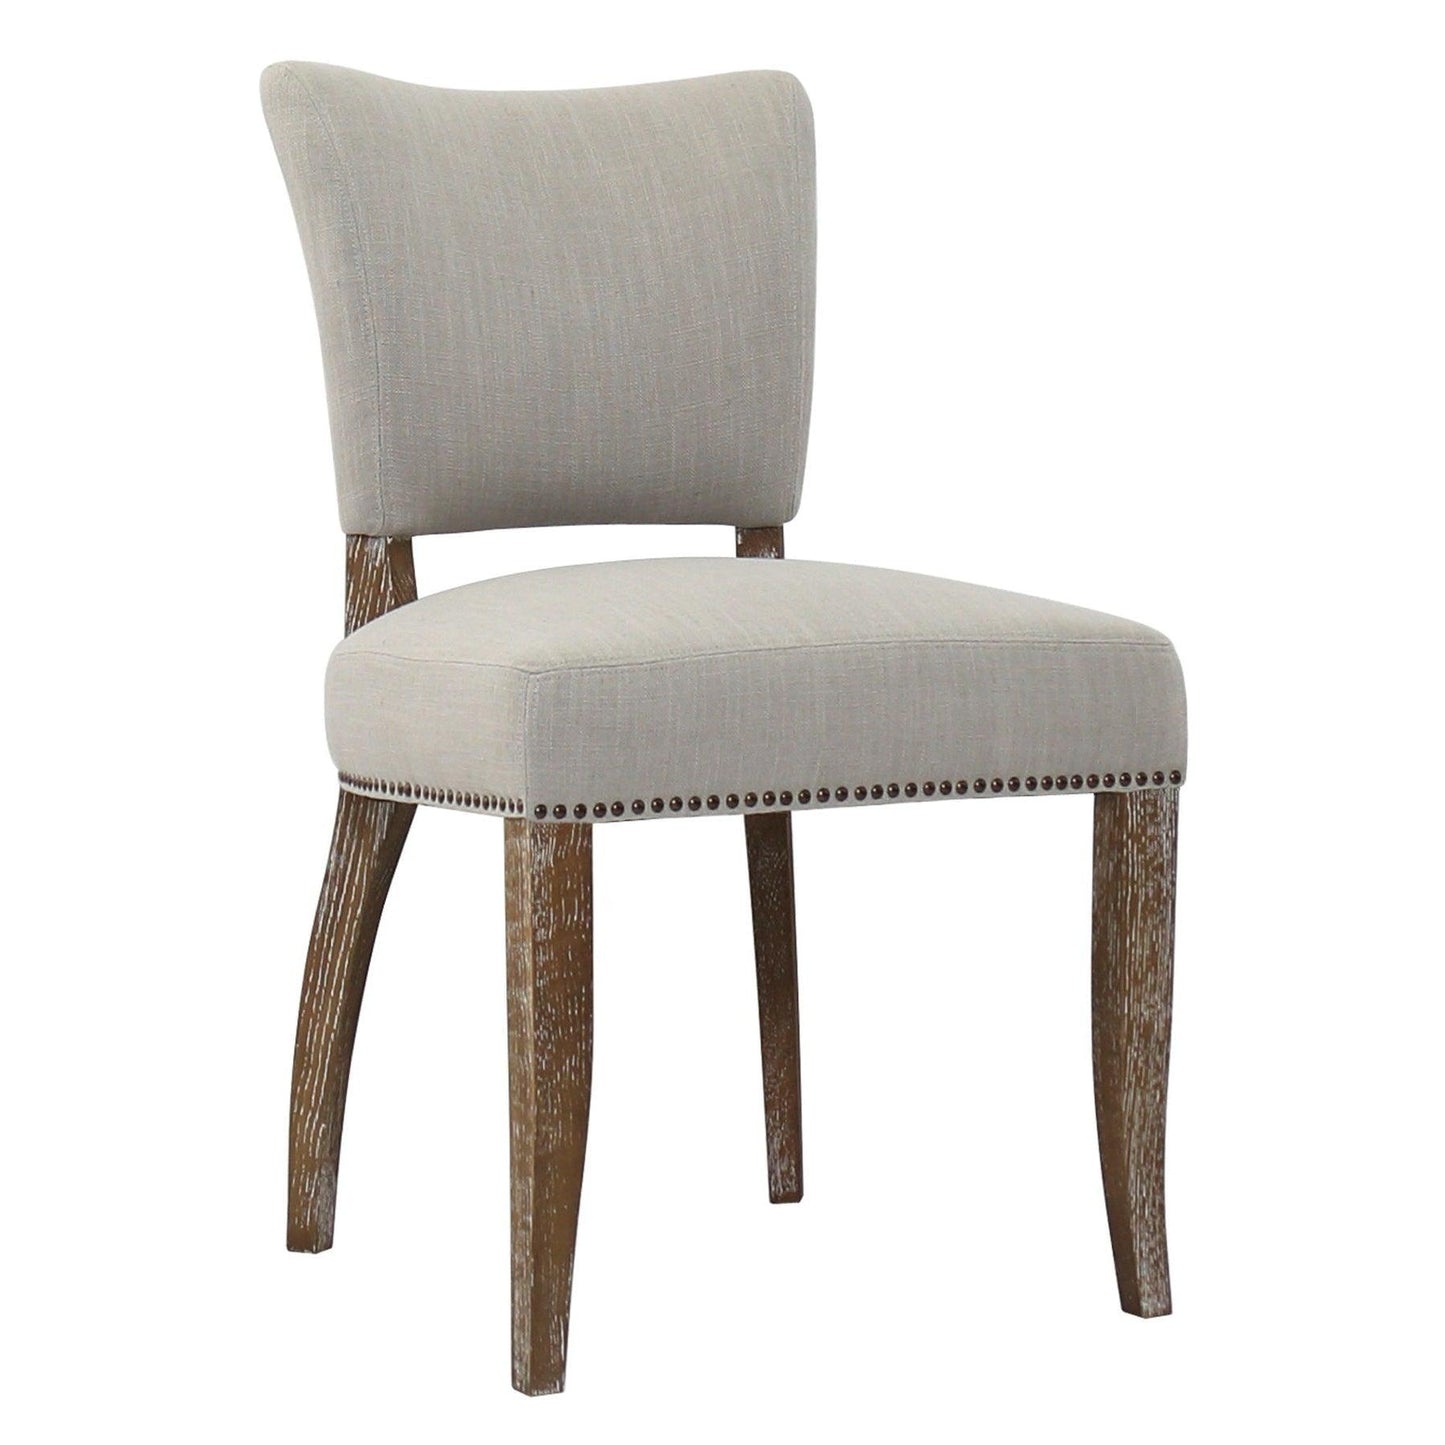 Light Beige 2PC Dining Chairs Set Armless with Floating Back - Sideboards and Things Back Type_Floating Back, Back Type_With Back, Brand_LH Imports, Color_Gray, Legs Material_Wood, Number of Pieces_2PC Set, Product Type_Dining Height, Seat Material_Upholstery, Shape_Armless, Upholstery Type_Fabric Blend, Wood Species_Oak